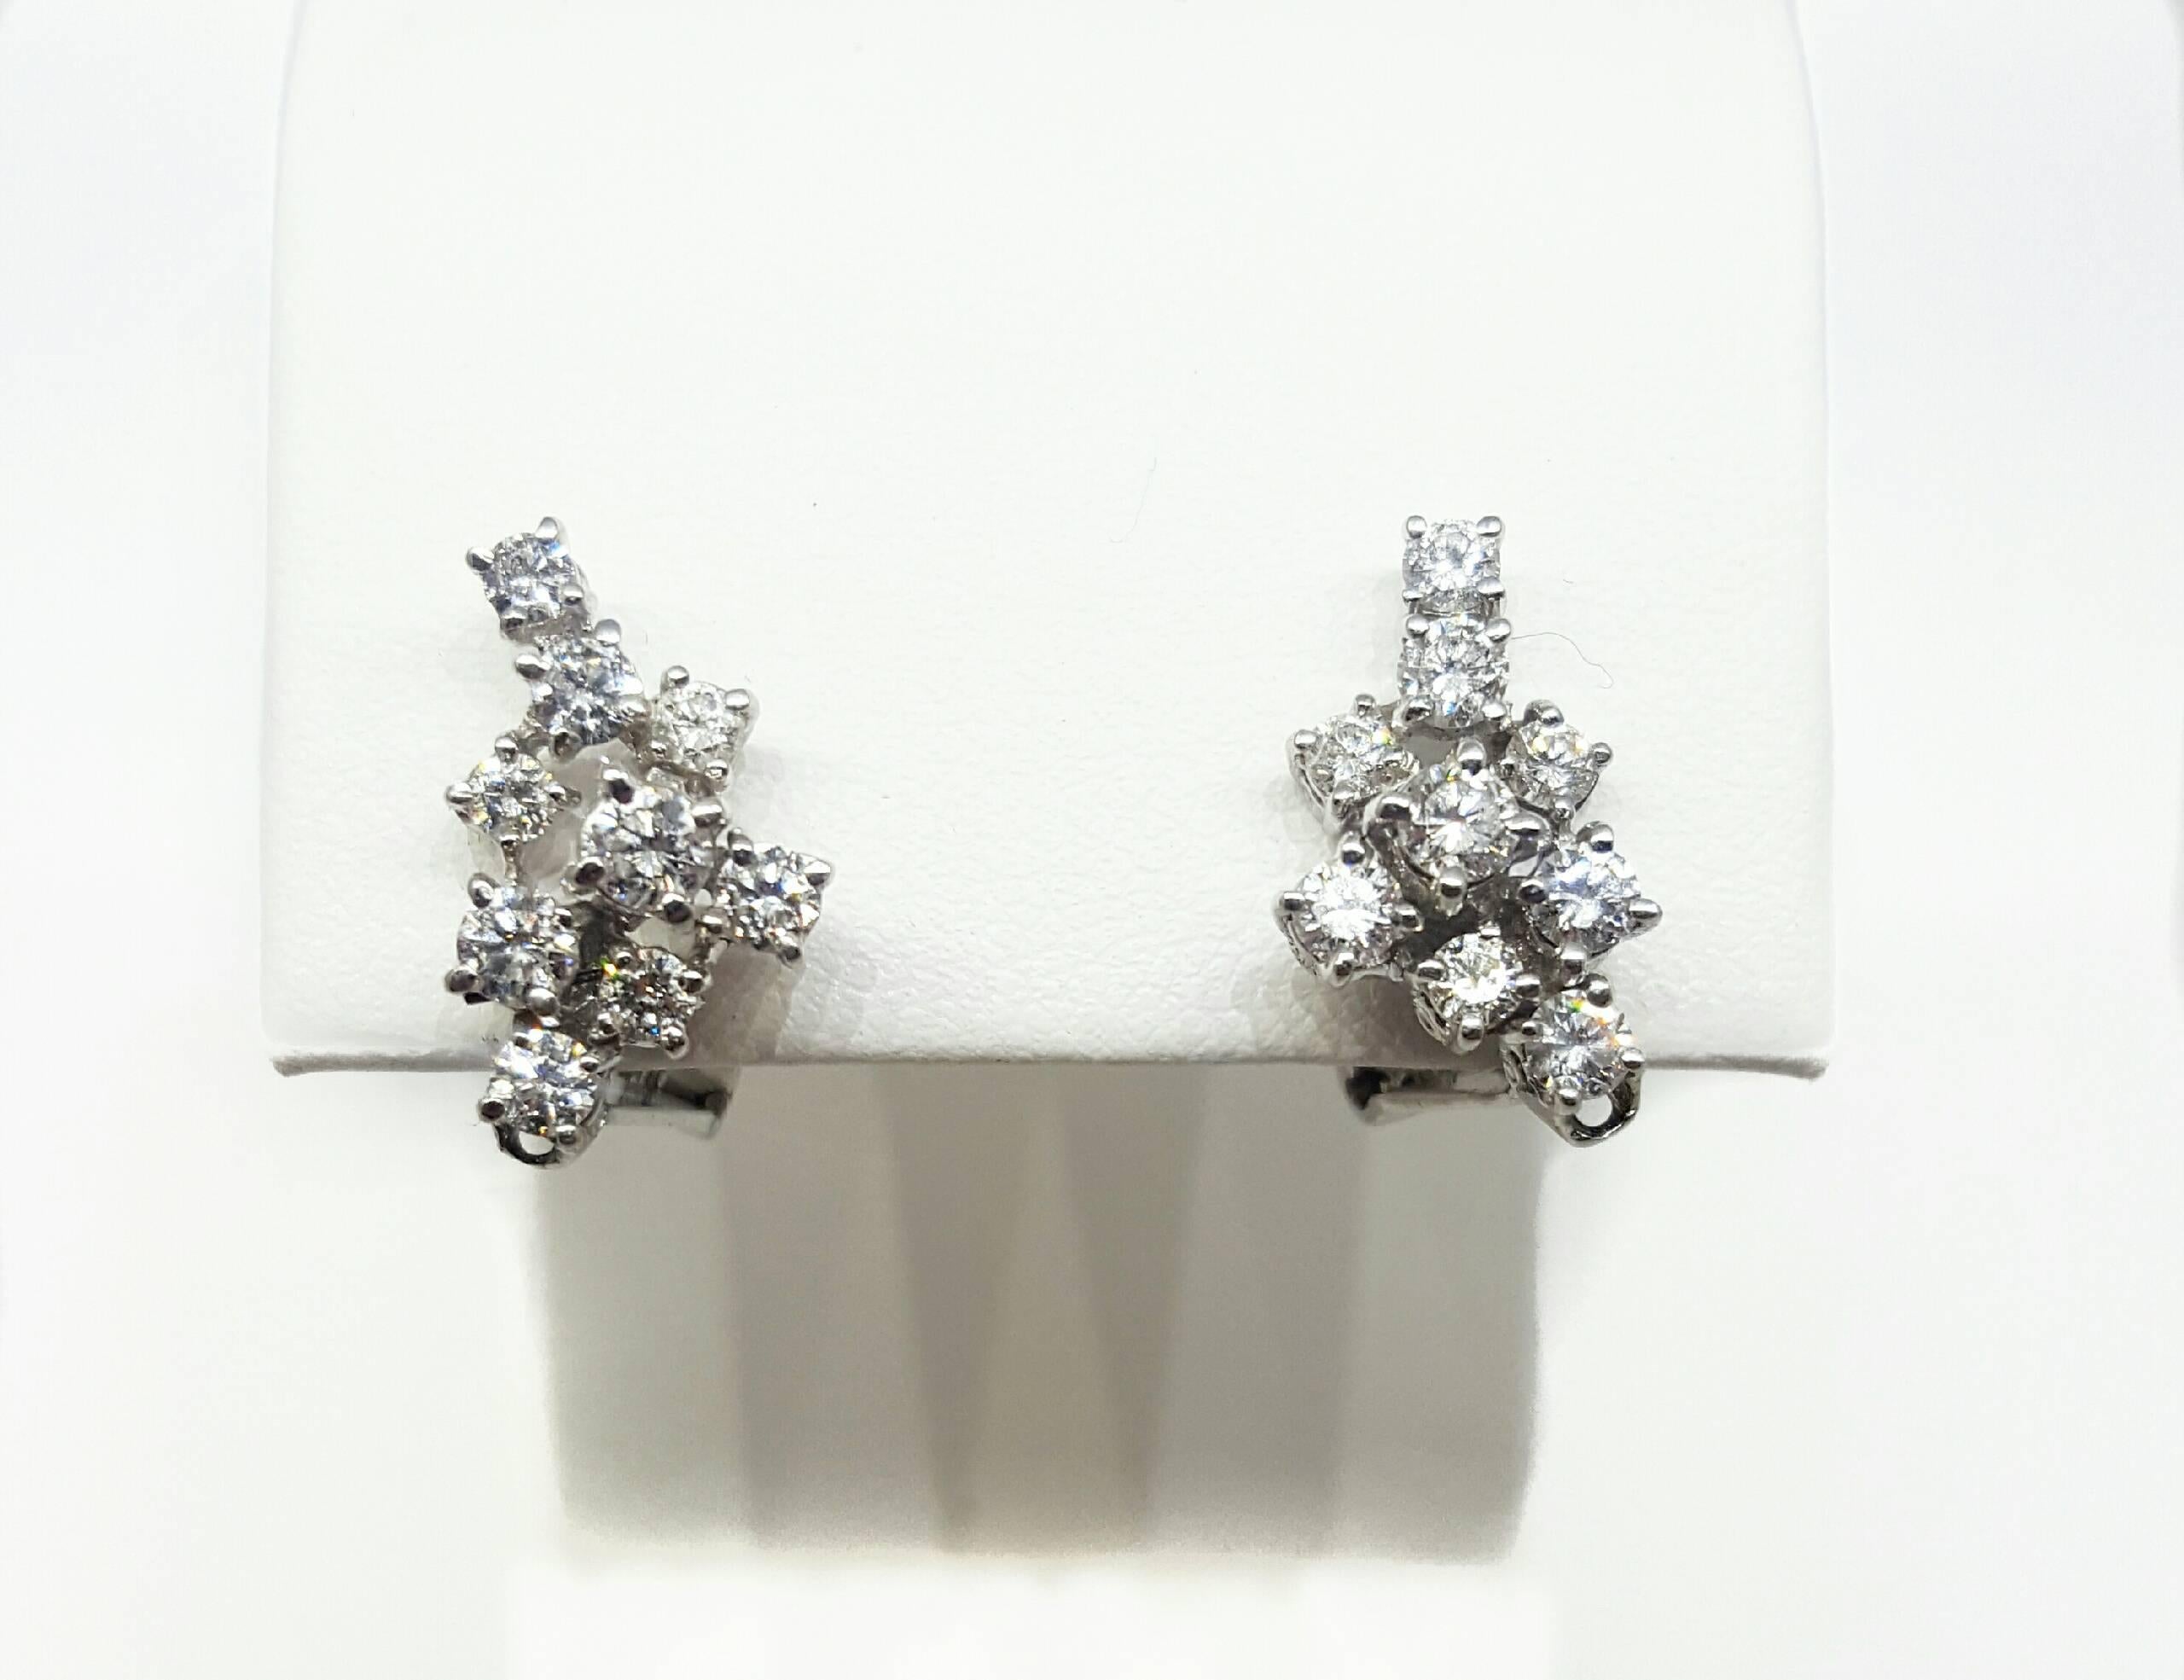 A unique pair of 18 karat white gold detachable diamond dangle earrings. The earrings are set with approximately 2.00cttw of Round Brilliant cut diamonds. The earrings can be worn as a dangle style earring, or adjusted to be worn as a cluster style.